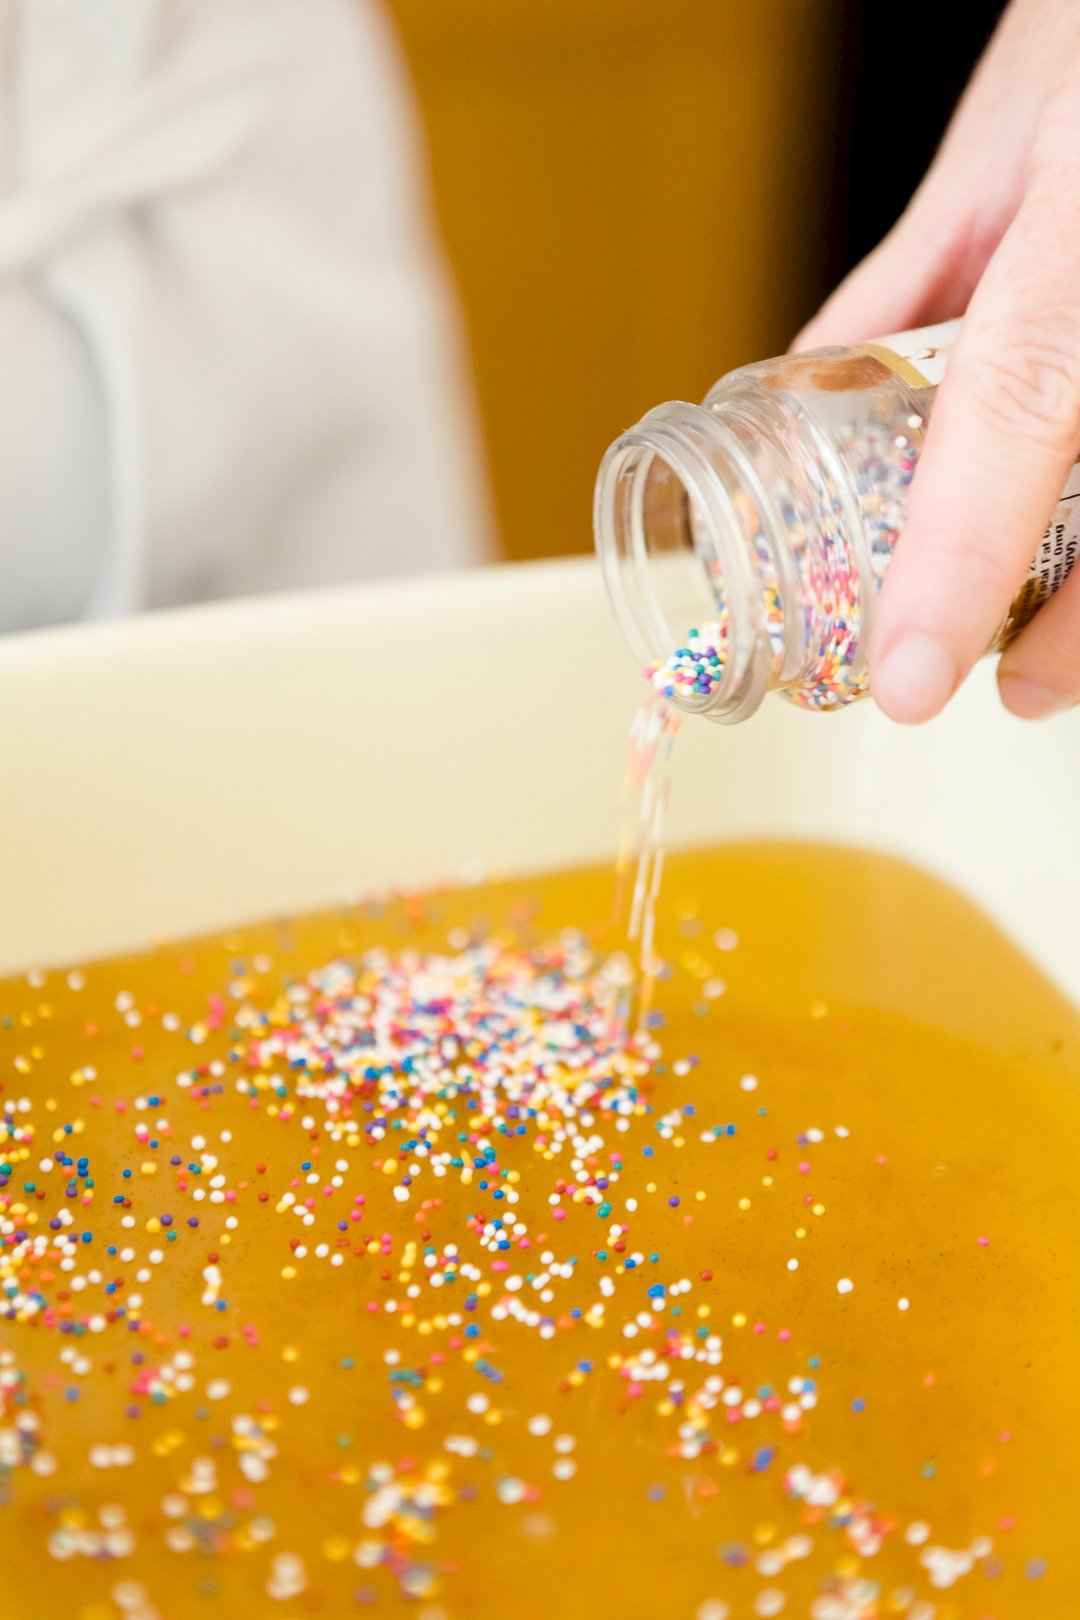 Adding nonpareils to taffy in a baking dish